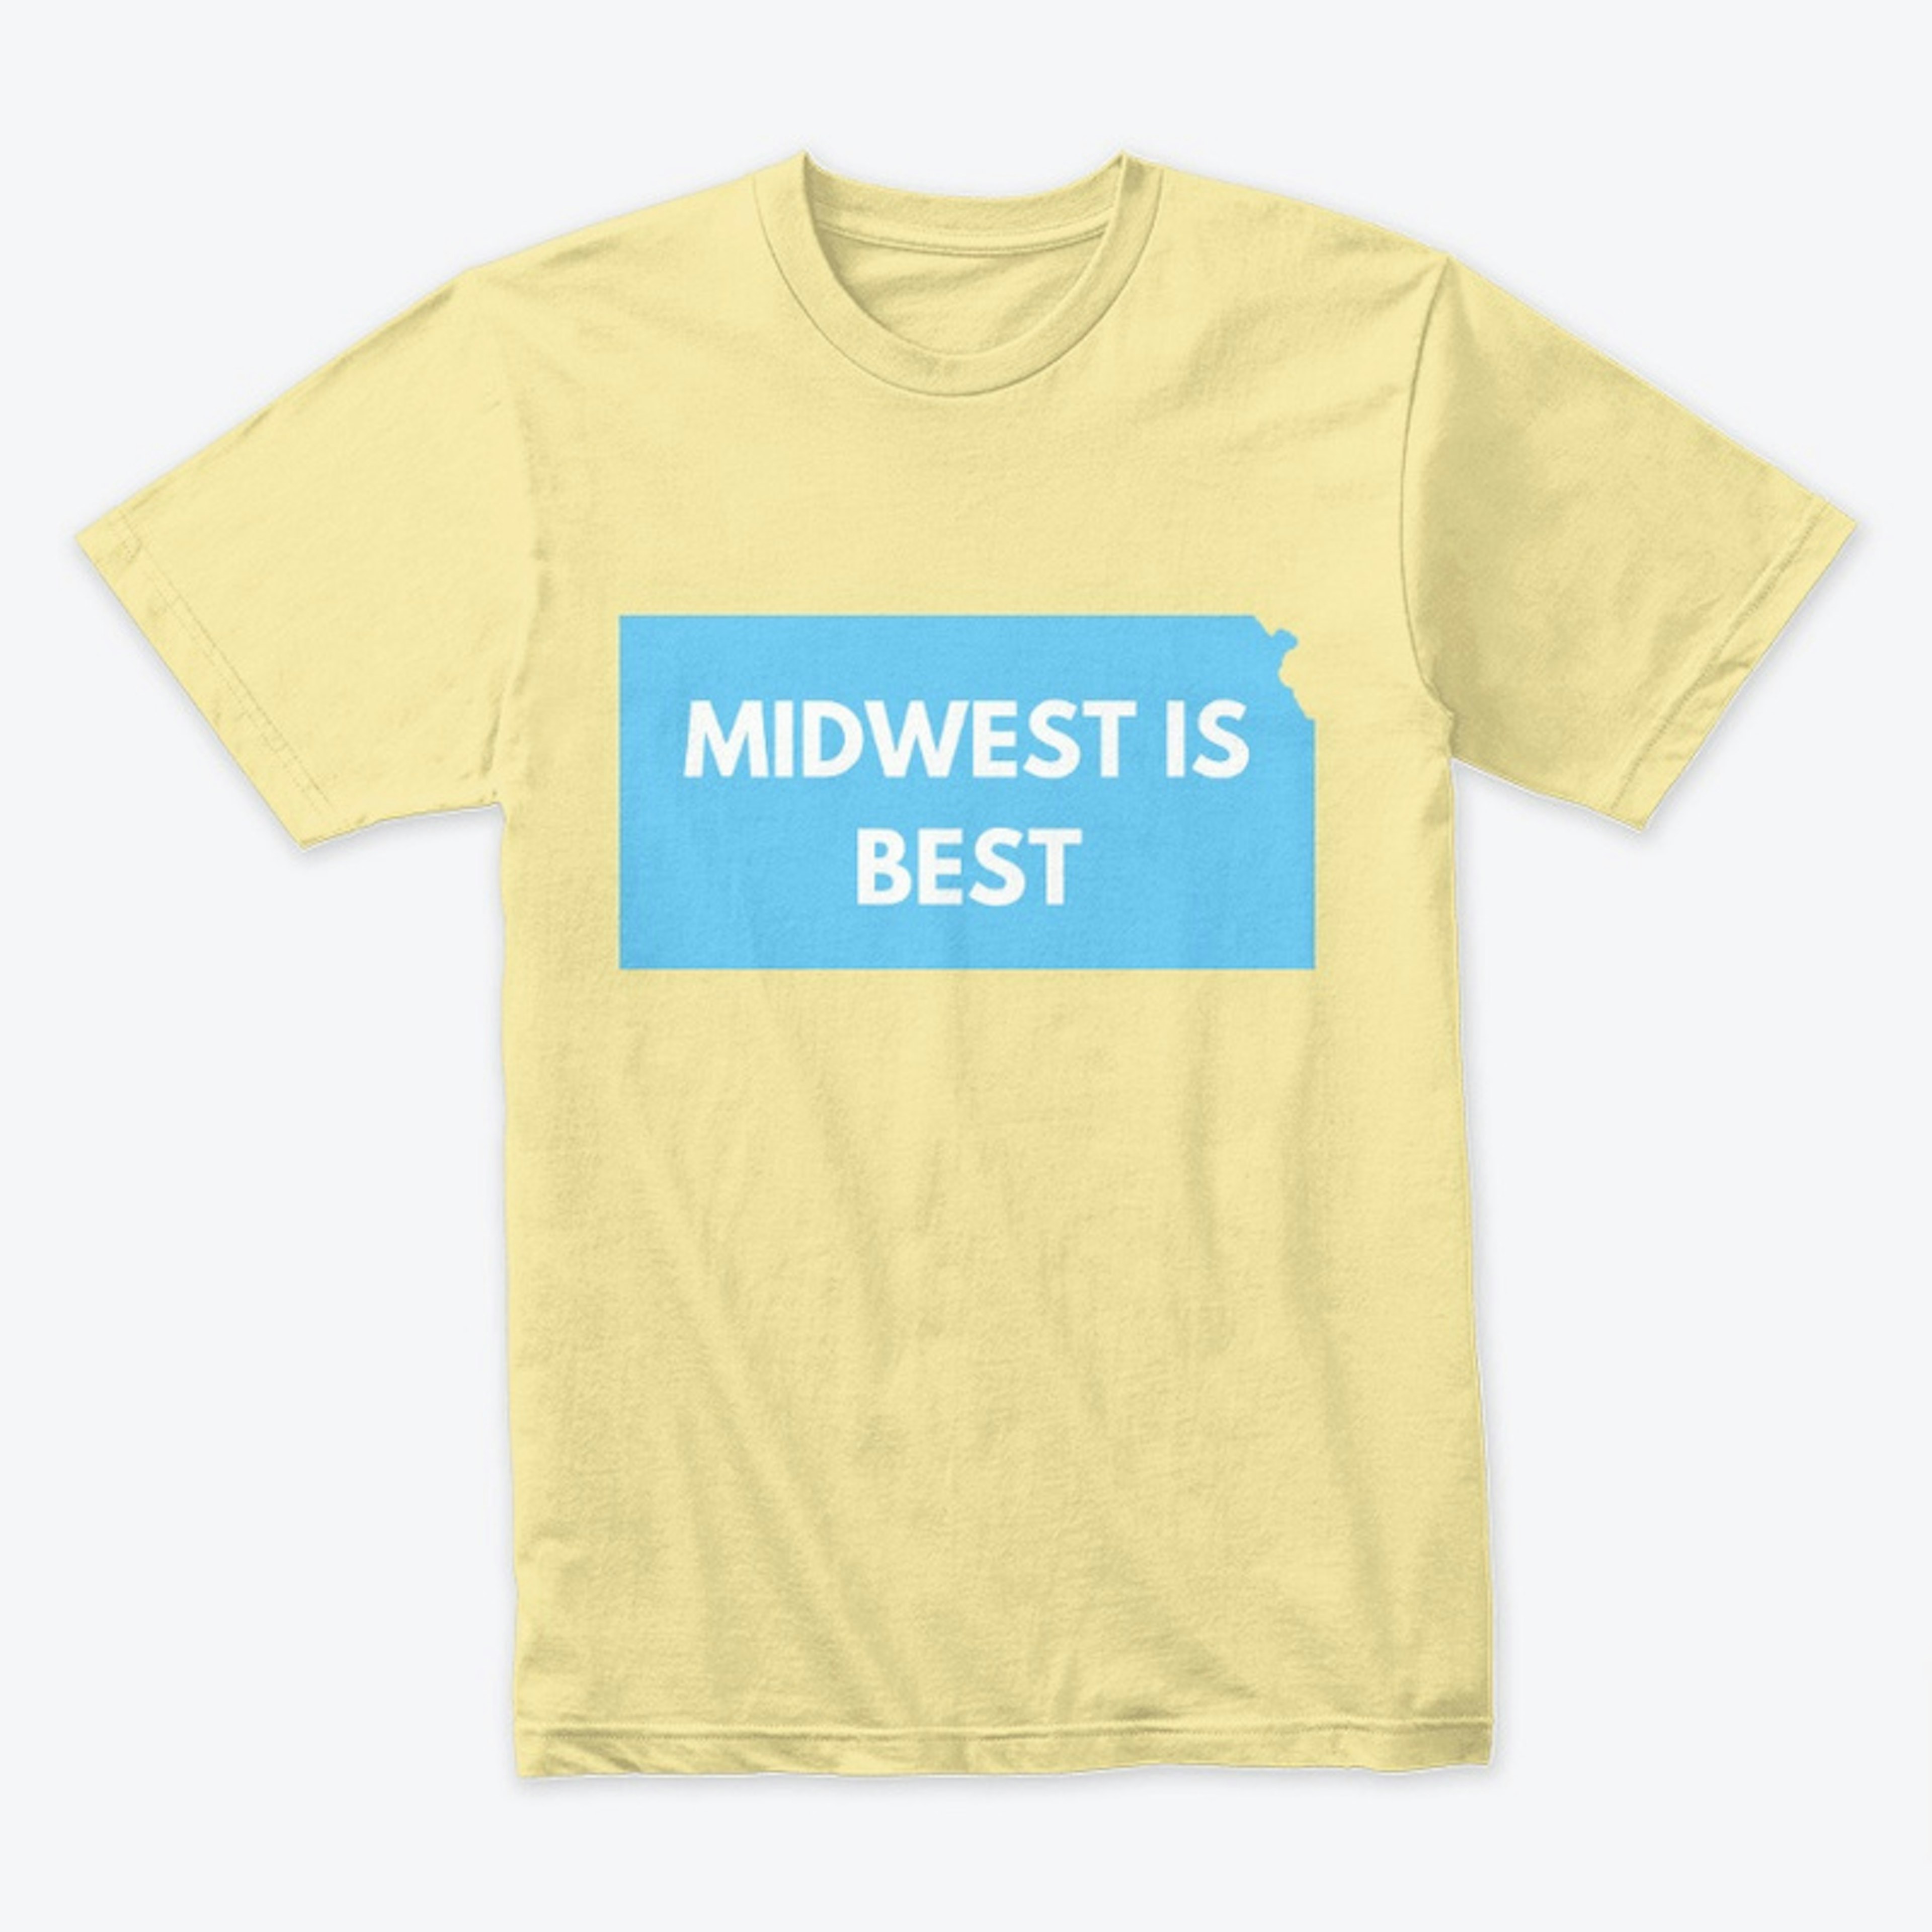 Midwest is Best!